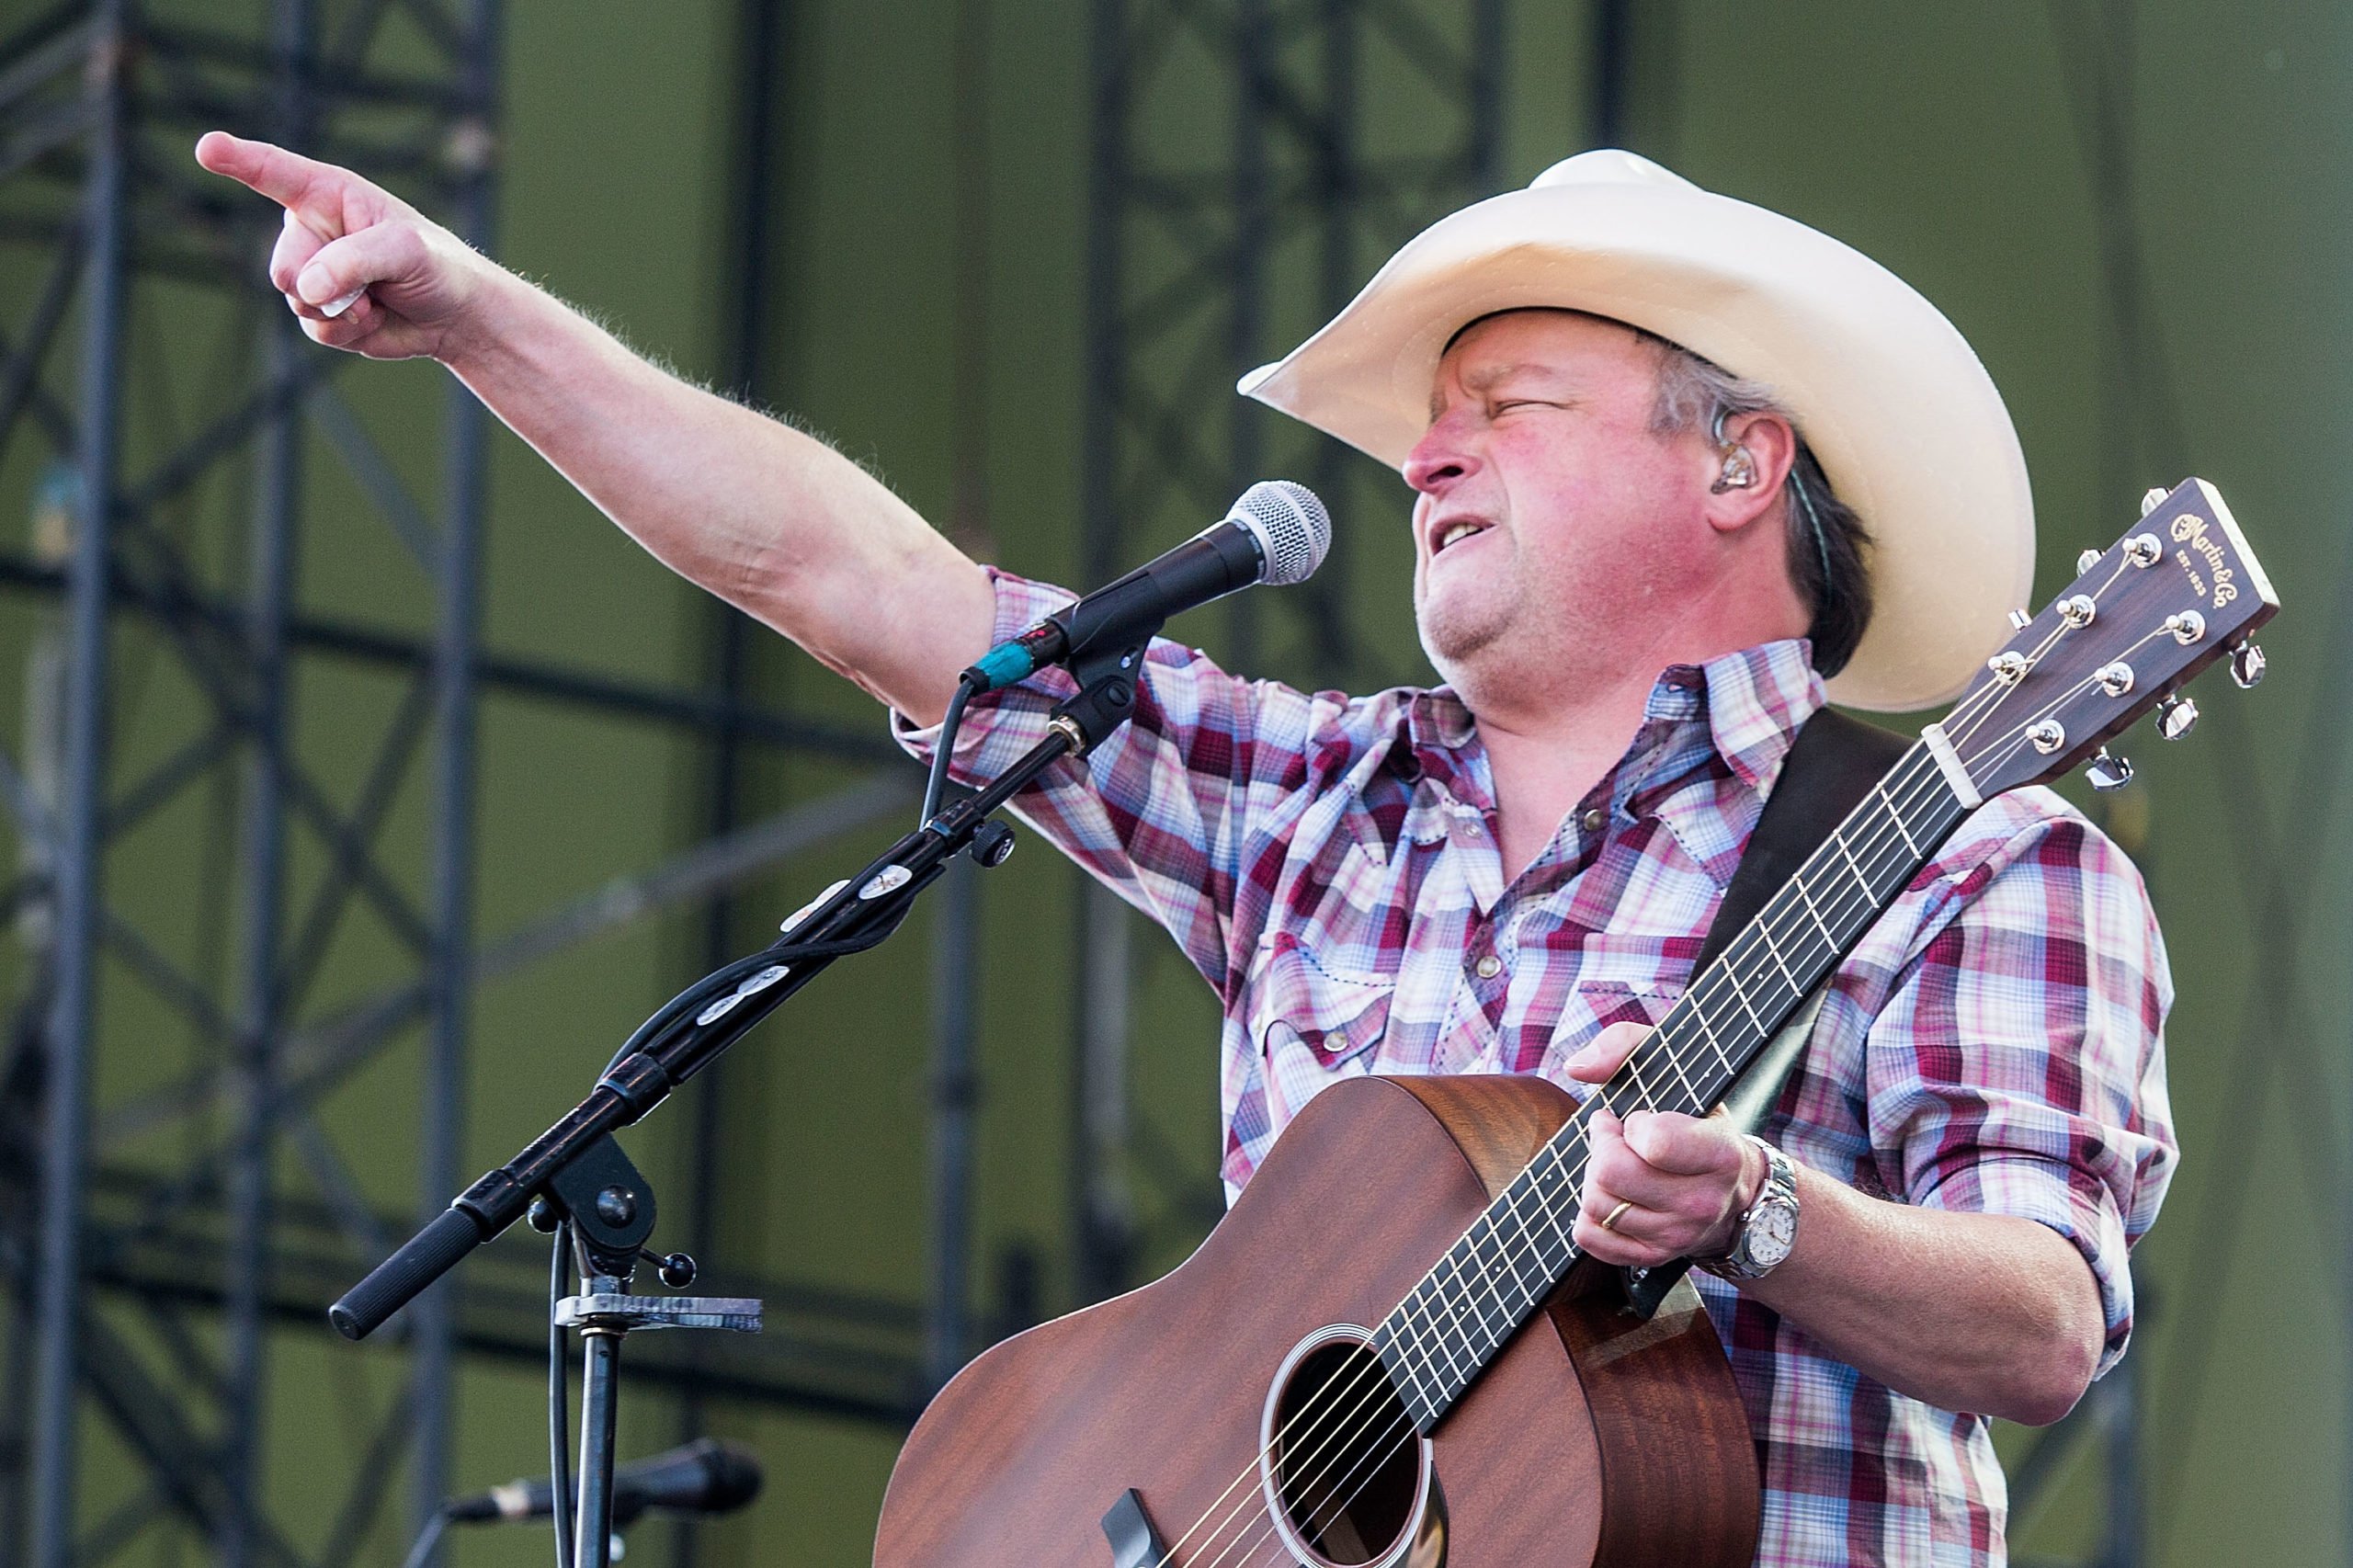 GEORGE, WA - AUGUST 01: Mark Chesnutt performs at the Watershed Music Festival at The Gorge on August 1, 2015 in George, Washington. (Photo by Suzi Pratt/FilmMagic/Getty Images)